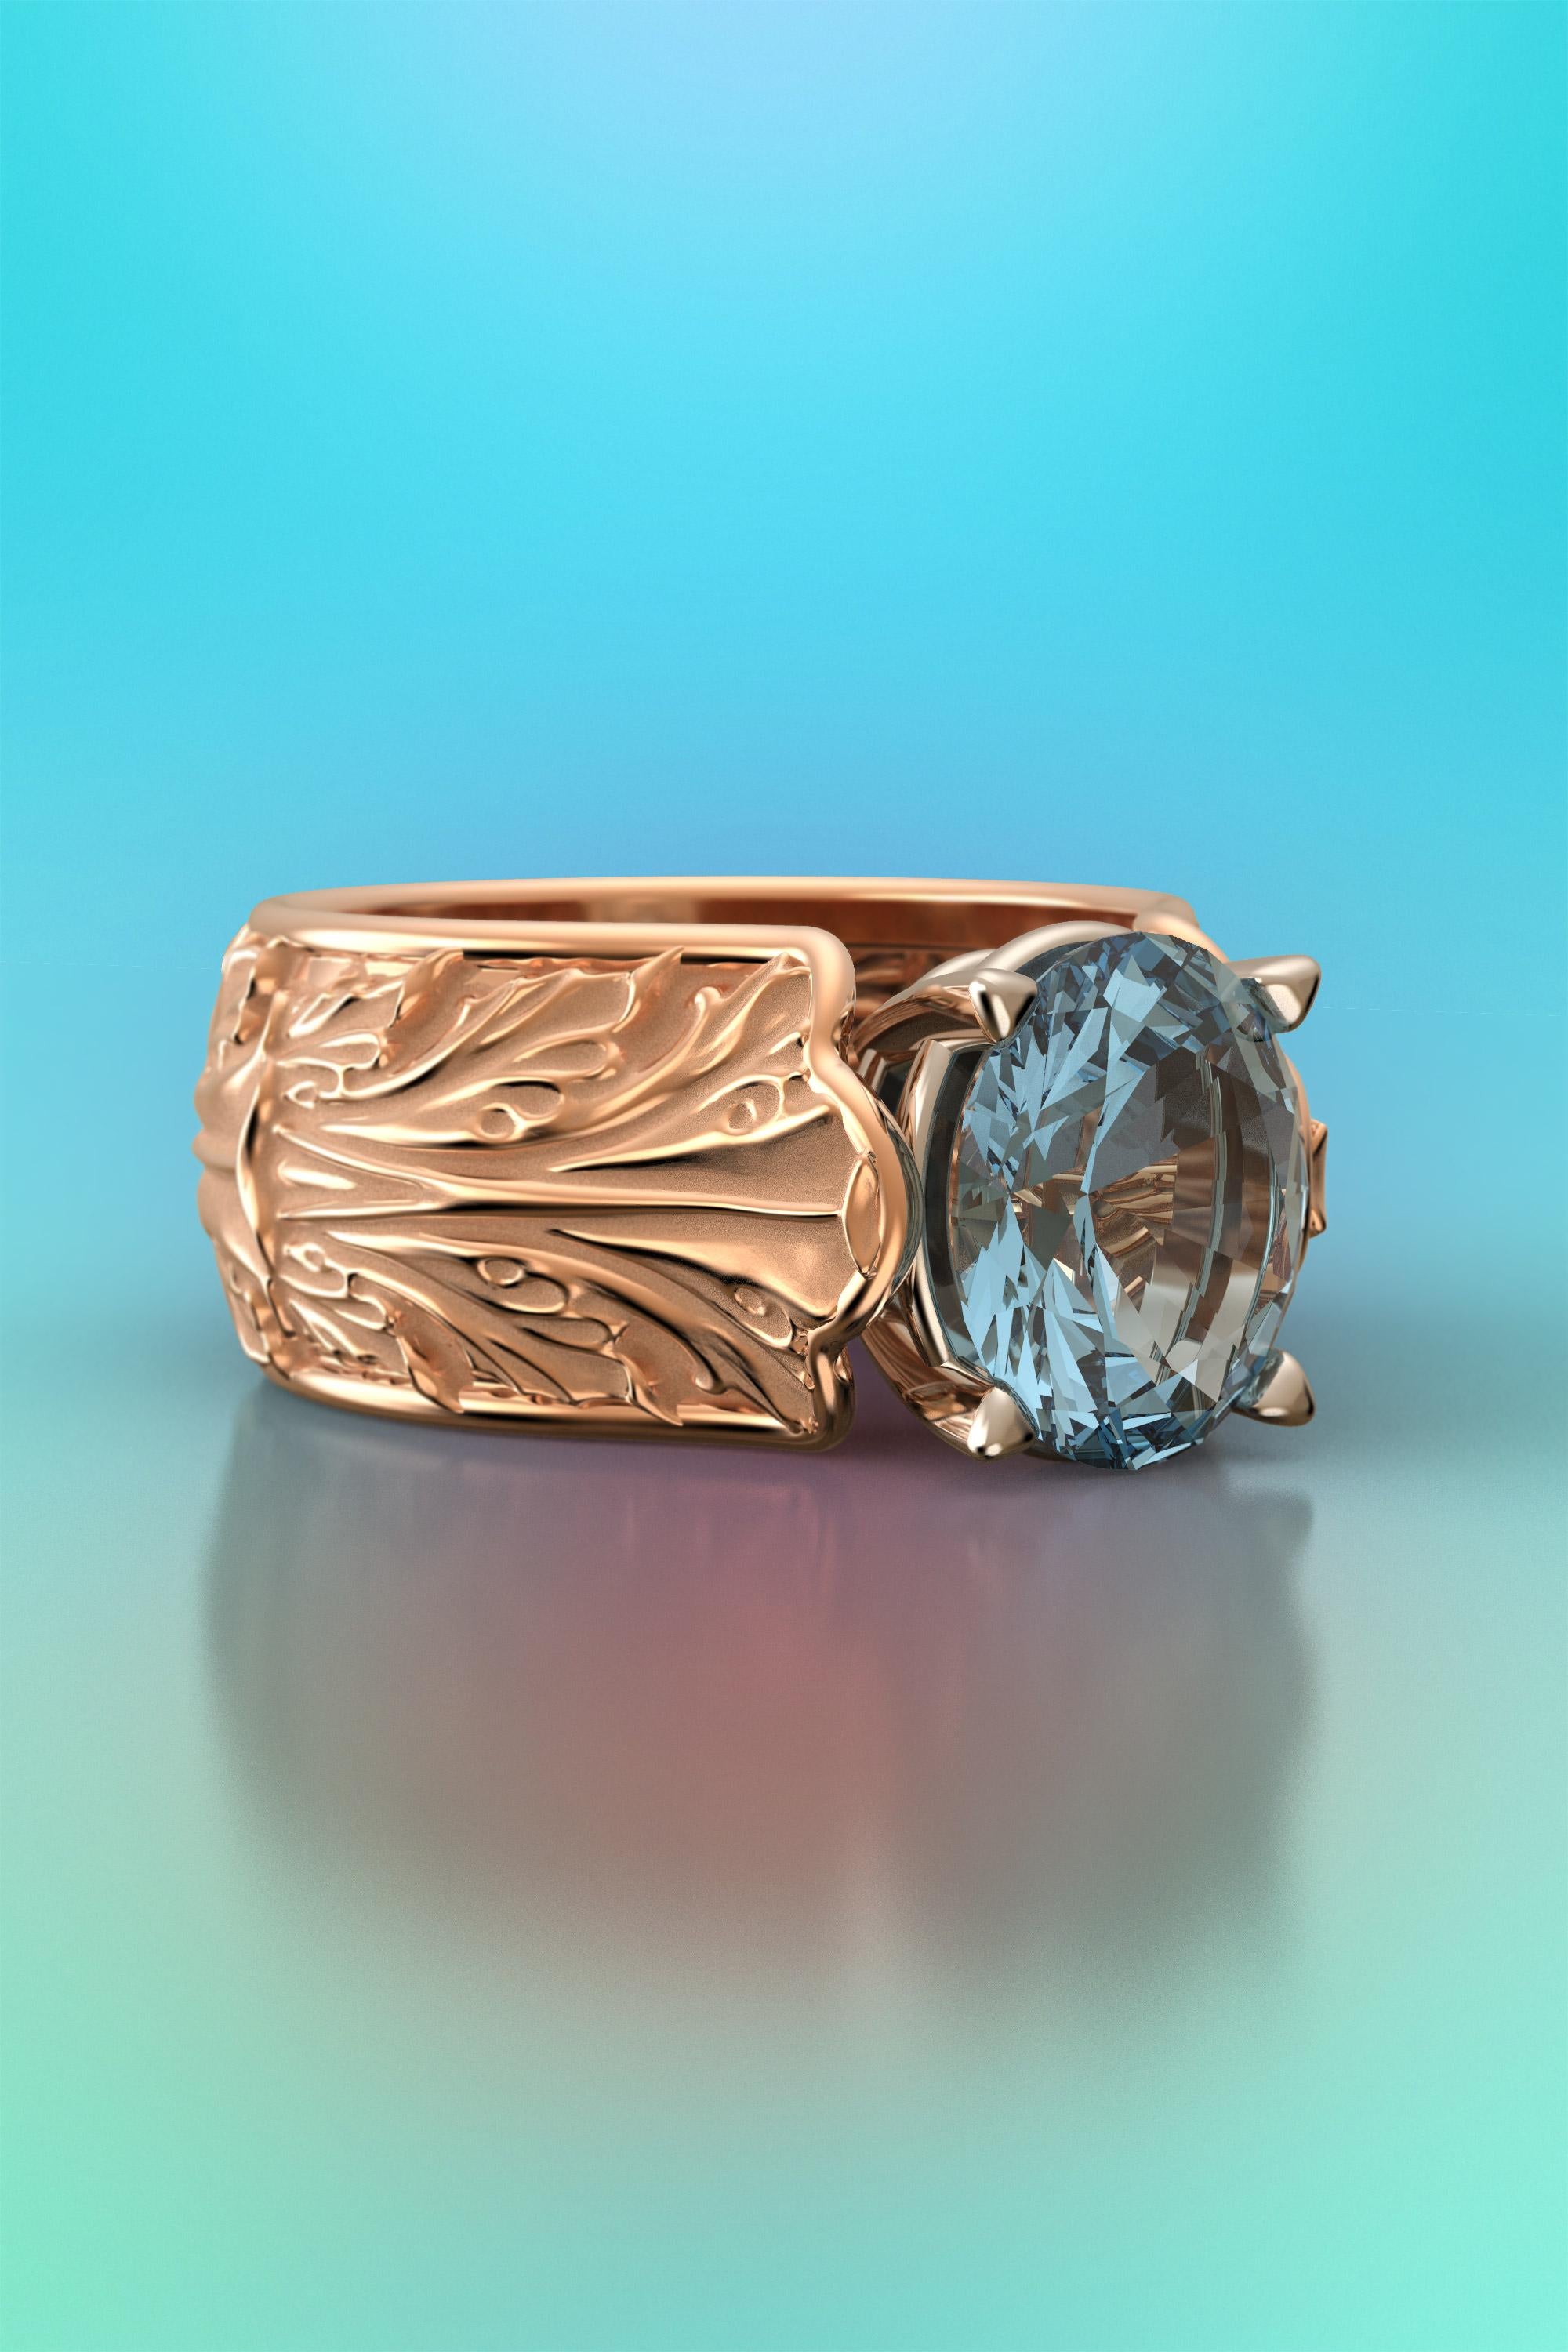 For Sale:  Baroque 14k Gold Ring with Natural Aquamarine Italian Fine Jewelry Made in Italy 6